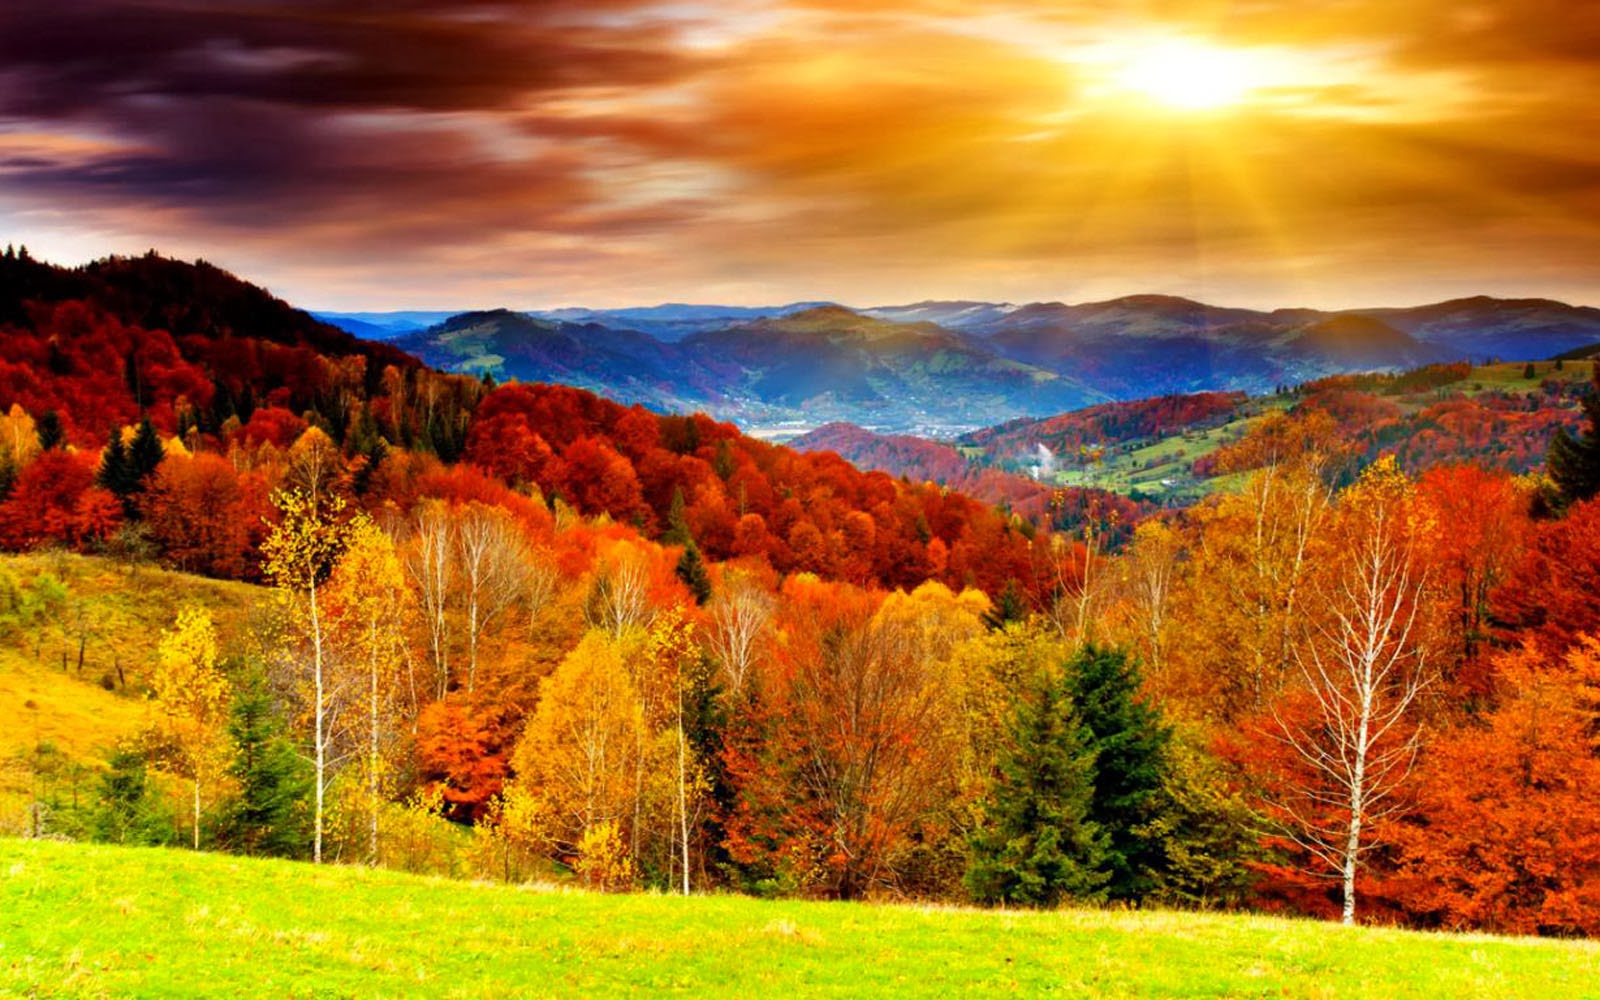 Tag: Autumn Scenery Wallpapers, Backgrounds,Photos, Images and ...